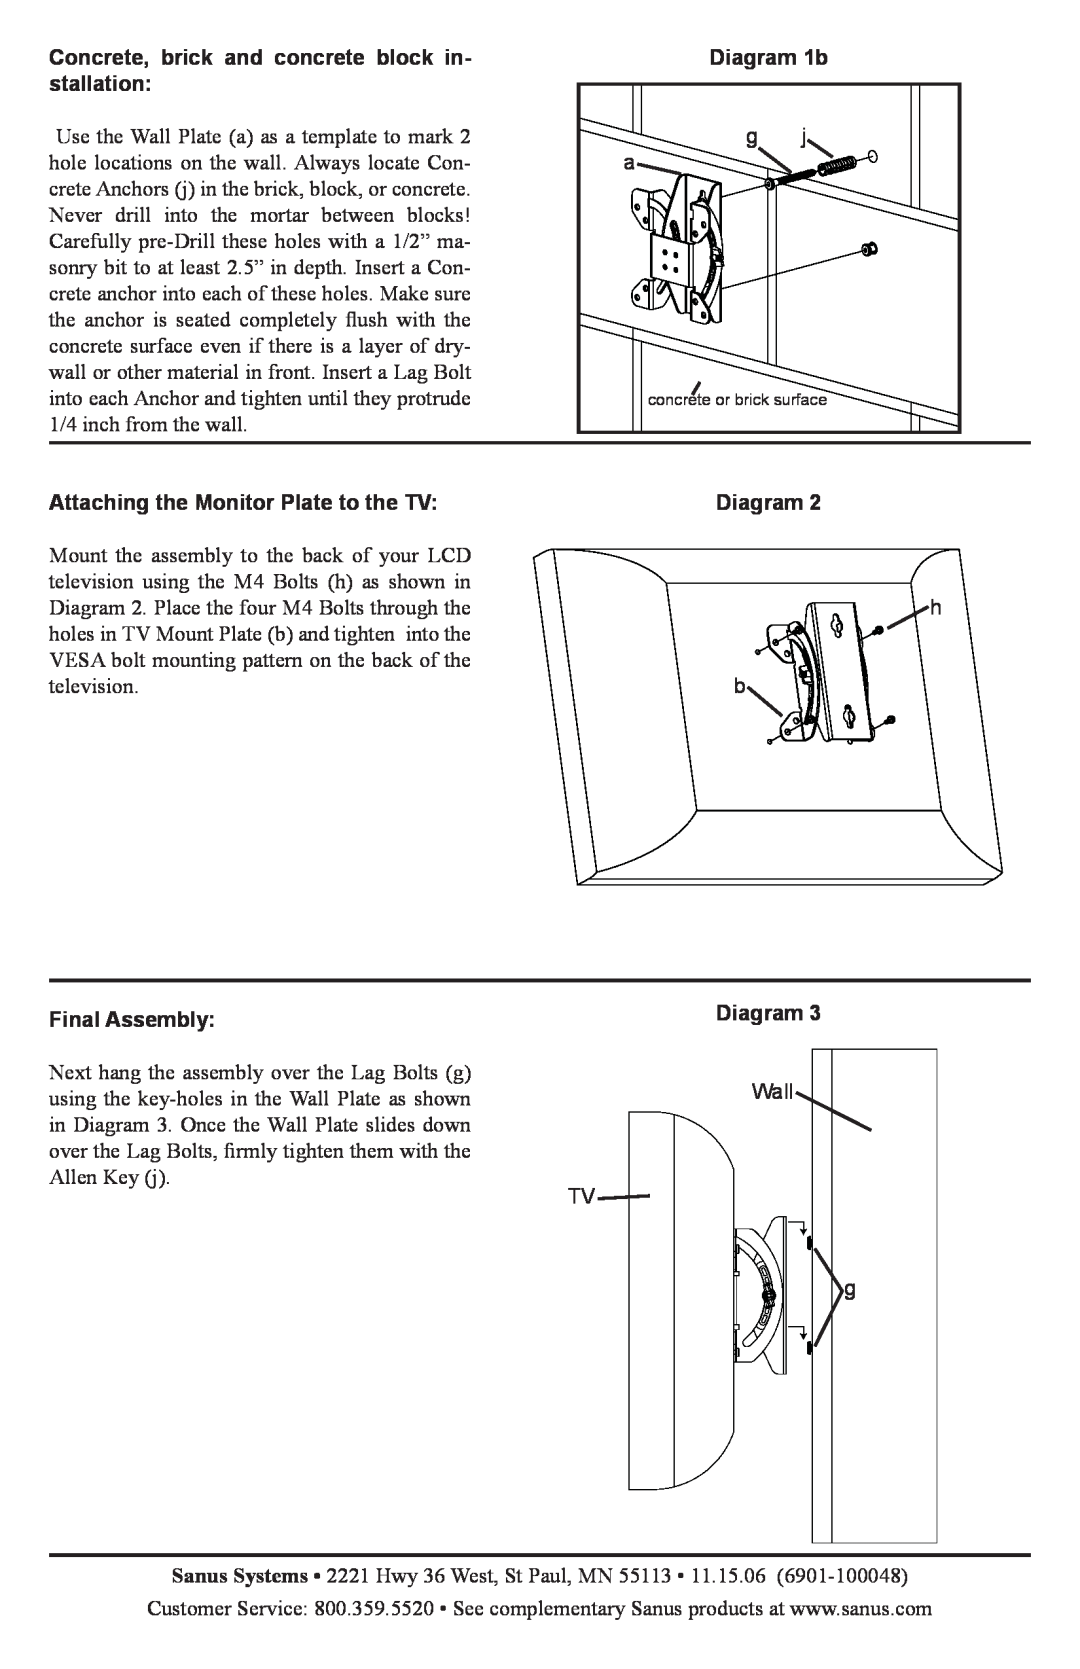 Sanus Systems VMF Concrete, brick and concrete block in- stallation, Diagram 1b, Attaching the Monitor Plate to the TV 